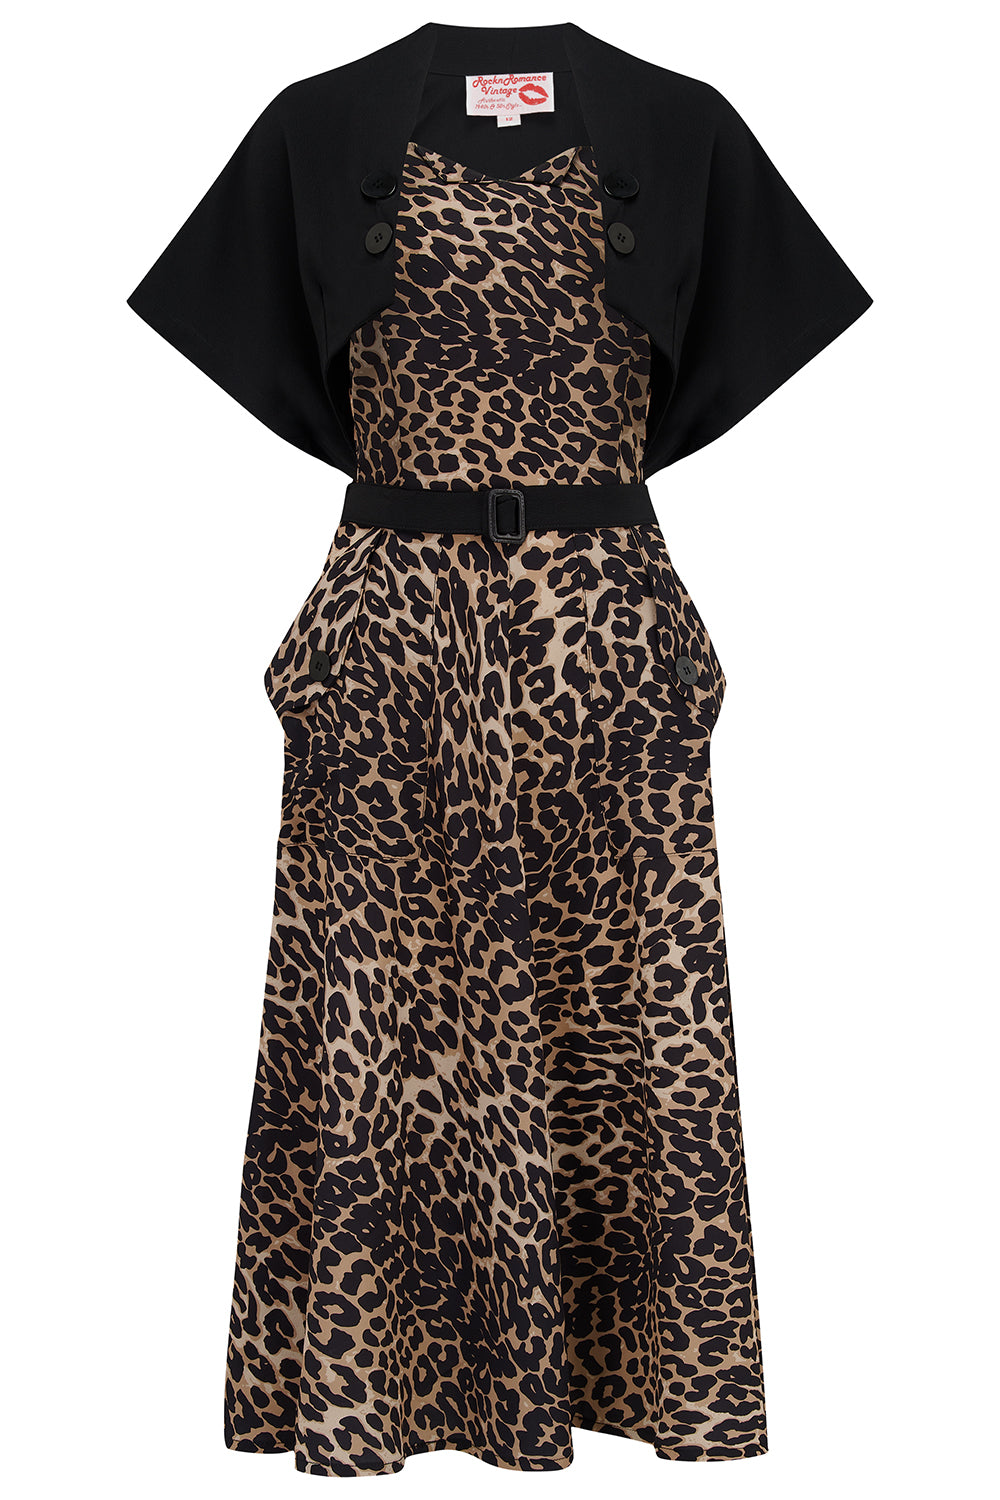 The "Ayda" 2pc Dress & Detachable Shrug Bolero Set In Leopard & Black, True Late 1940s - Early 50s Vintage Style - True and authentic vintage style clothing, inspired by the Classic styles of CC41 , WW2 and the fun 1950s RocknRoll era, for everyday wear plus events like Goodwood Revival, Twinwood Festival and Viva Las Vegas Rockabilly Weekend Rock n Romance Rock n Romance